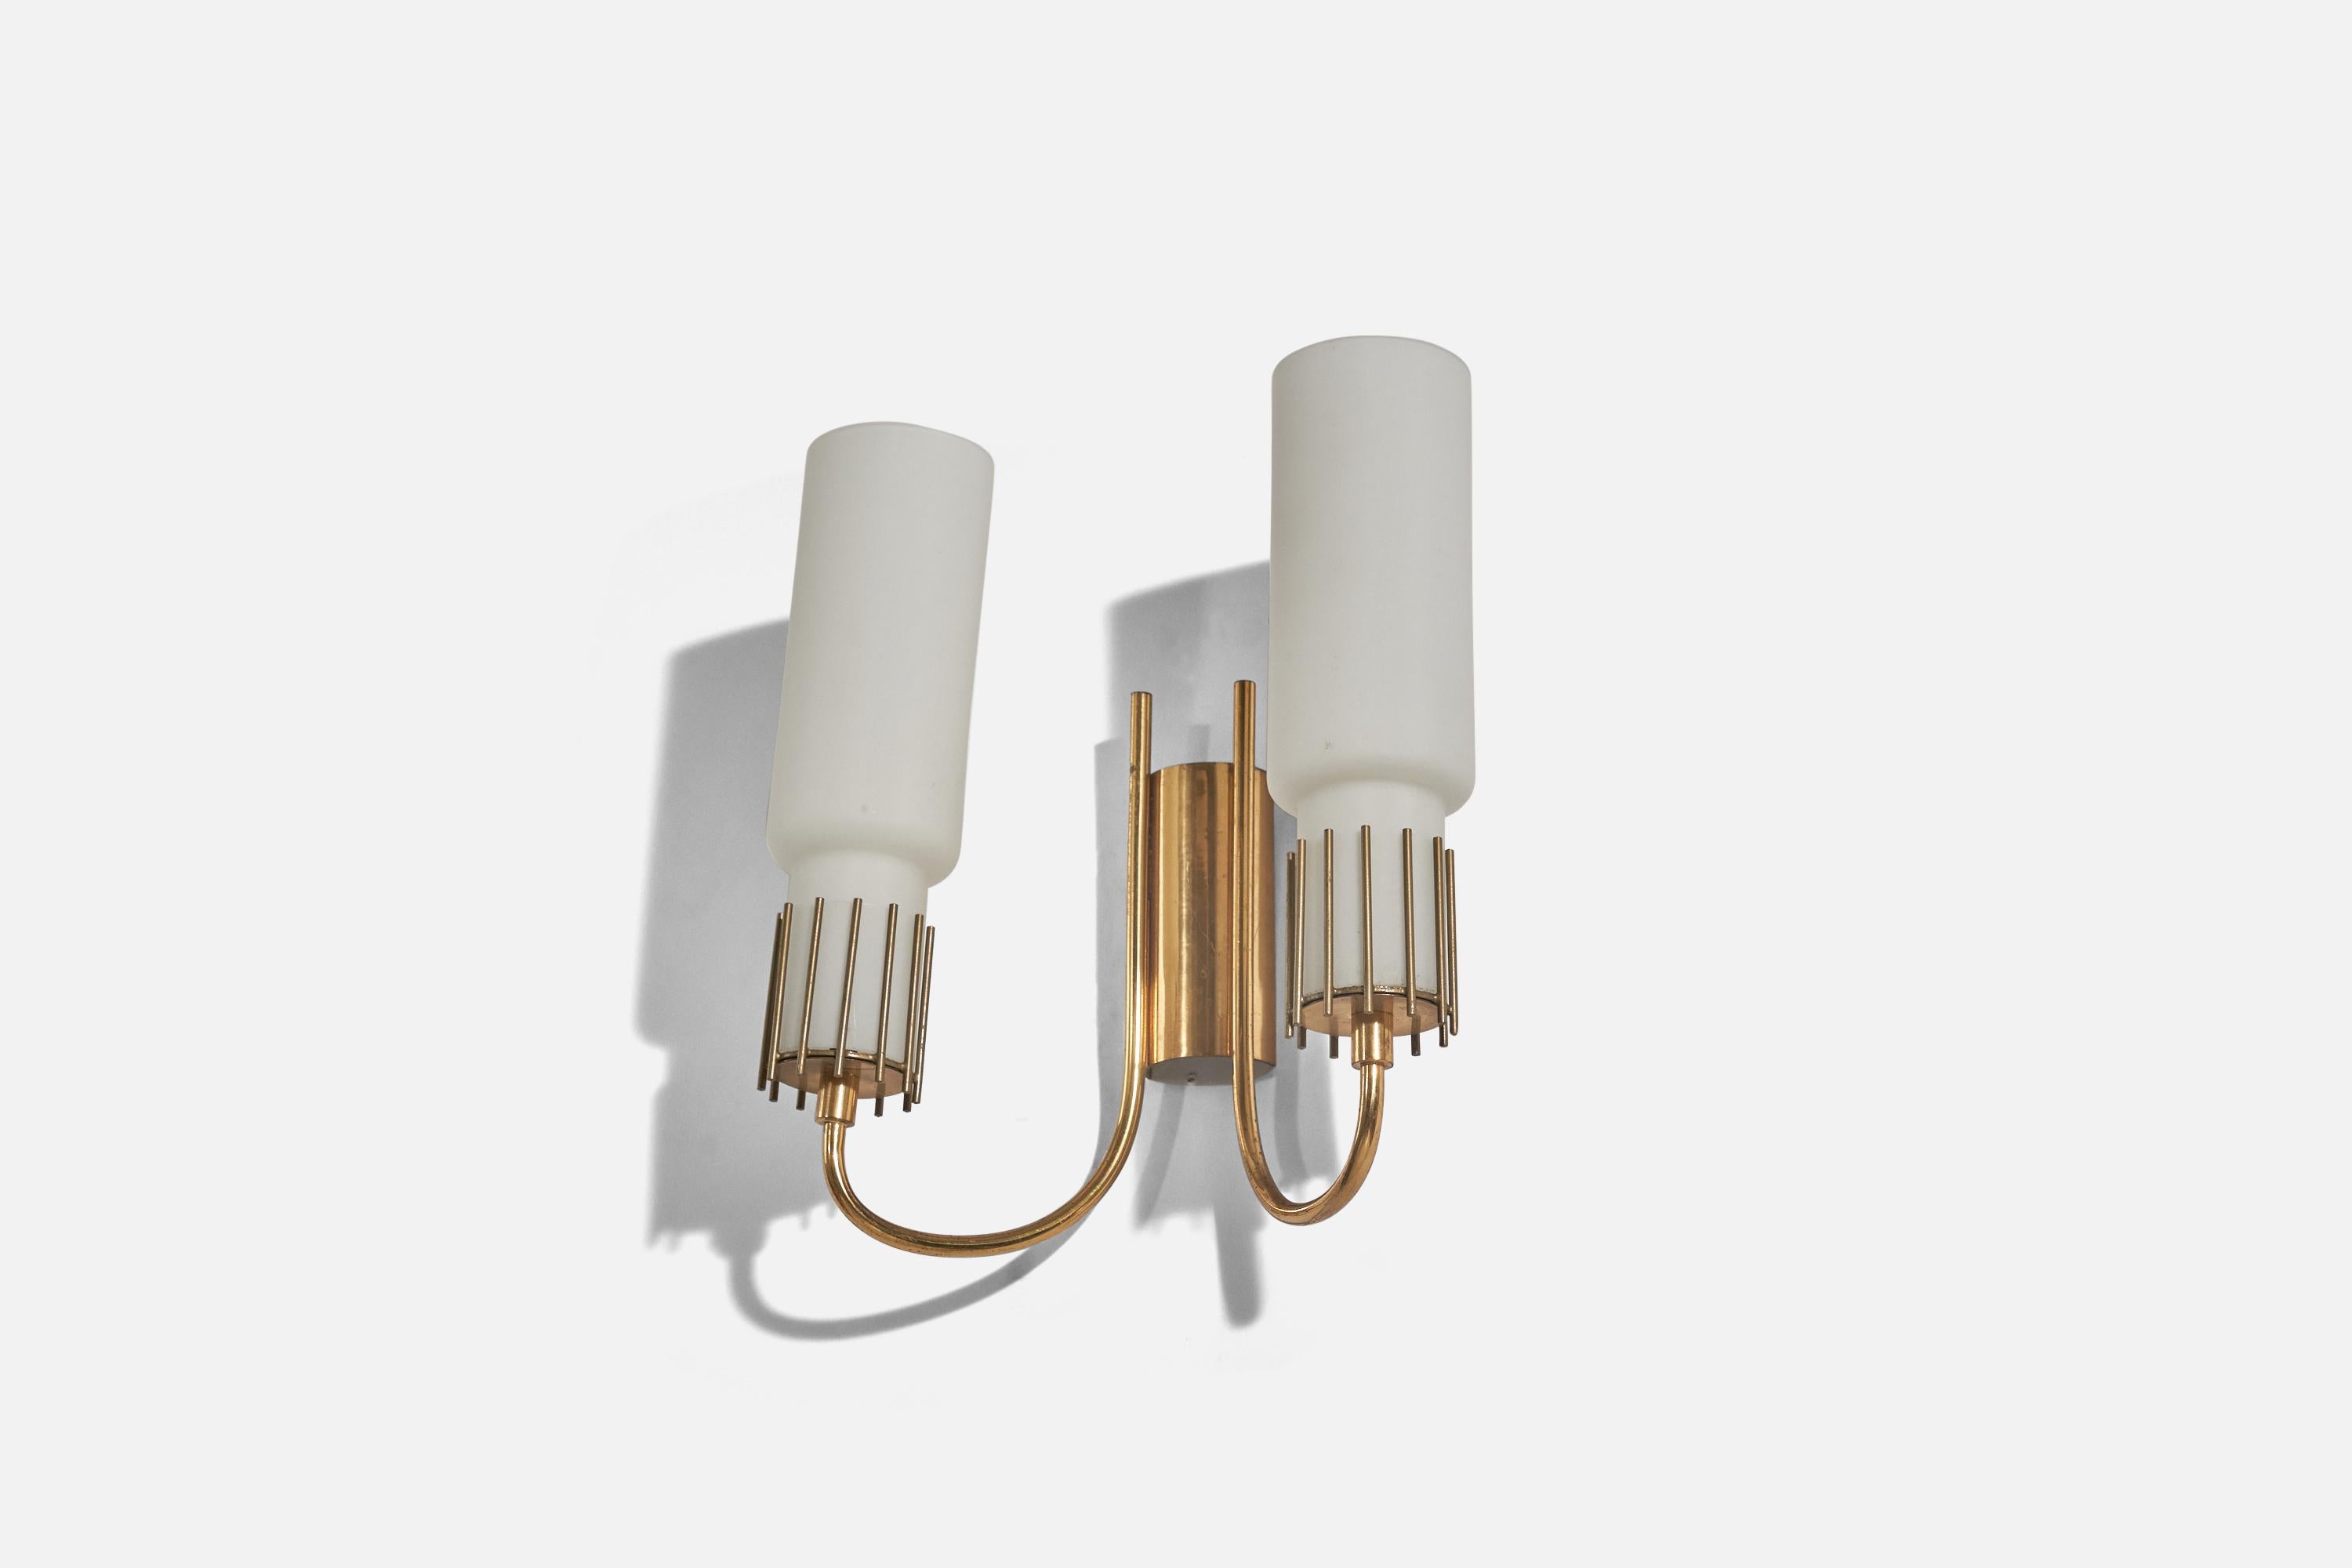 A pair of two-armed brass and glass wall lights designed and produced by an Italian designer, Italy, 1950s.

